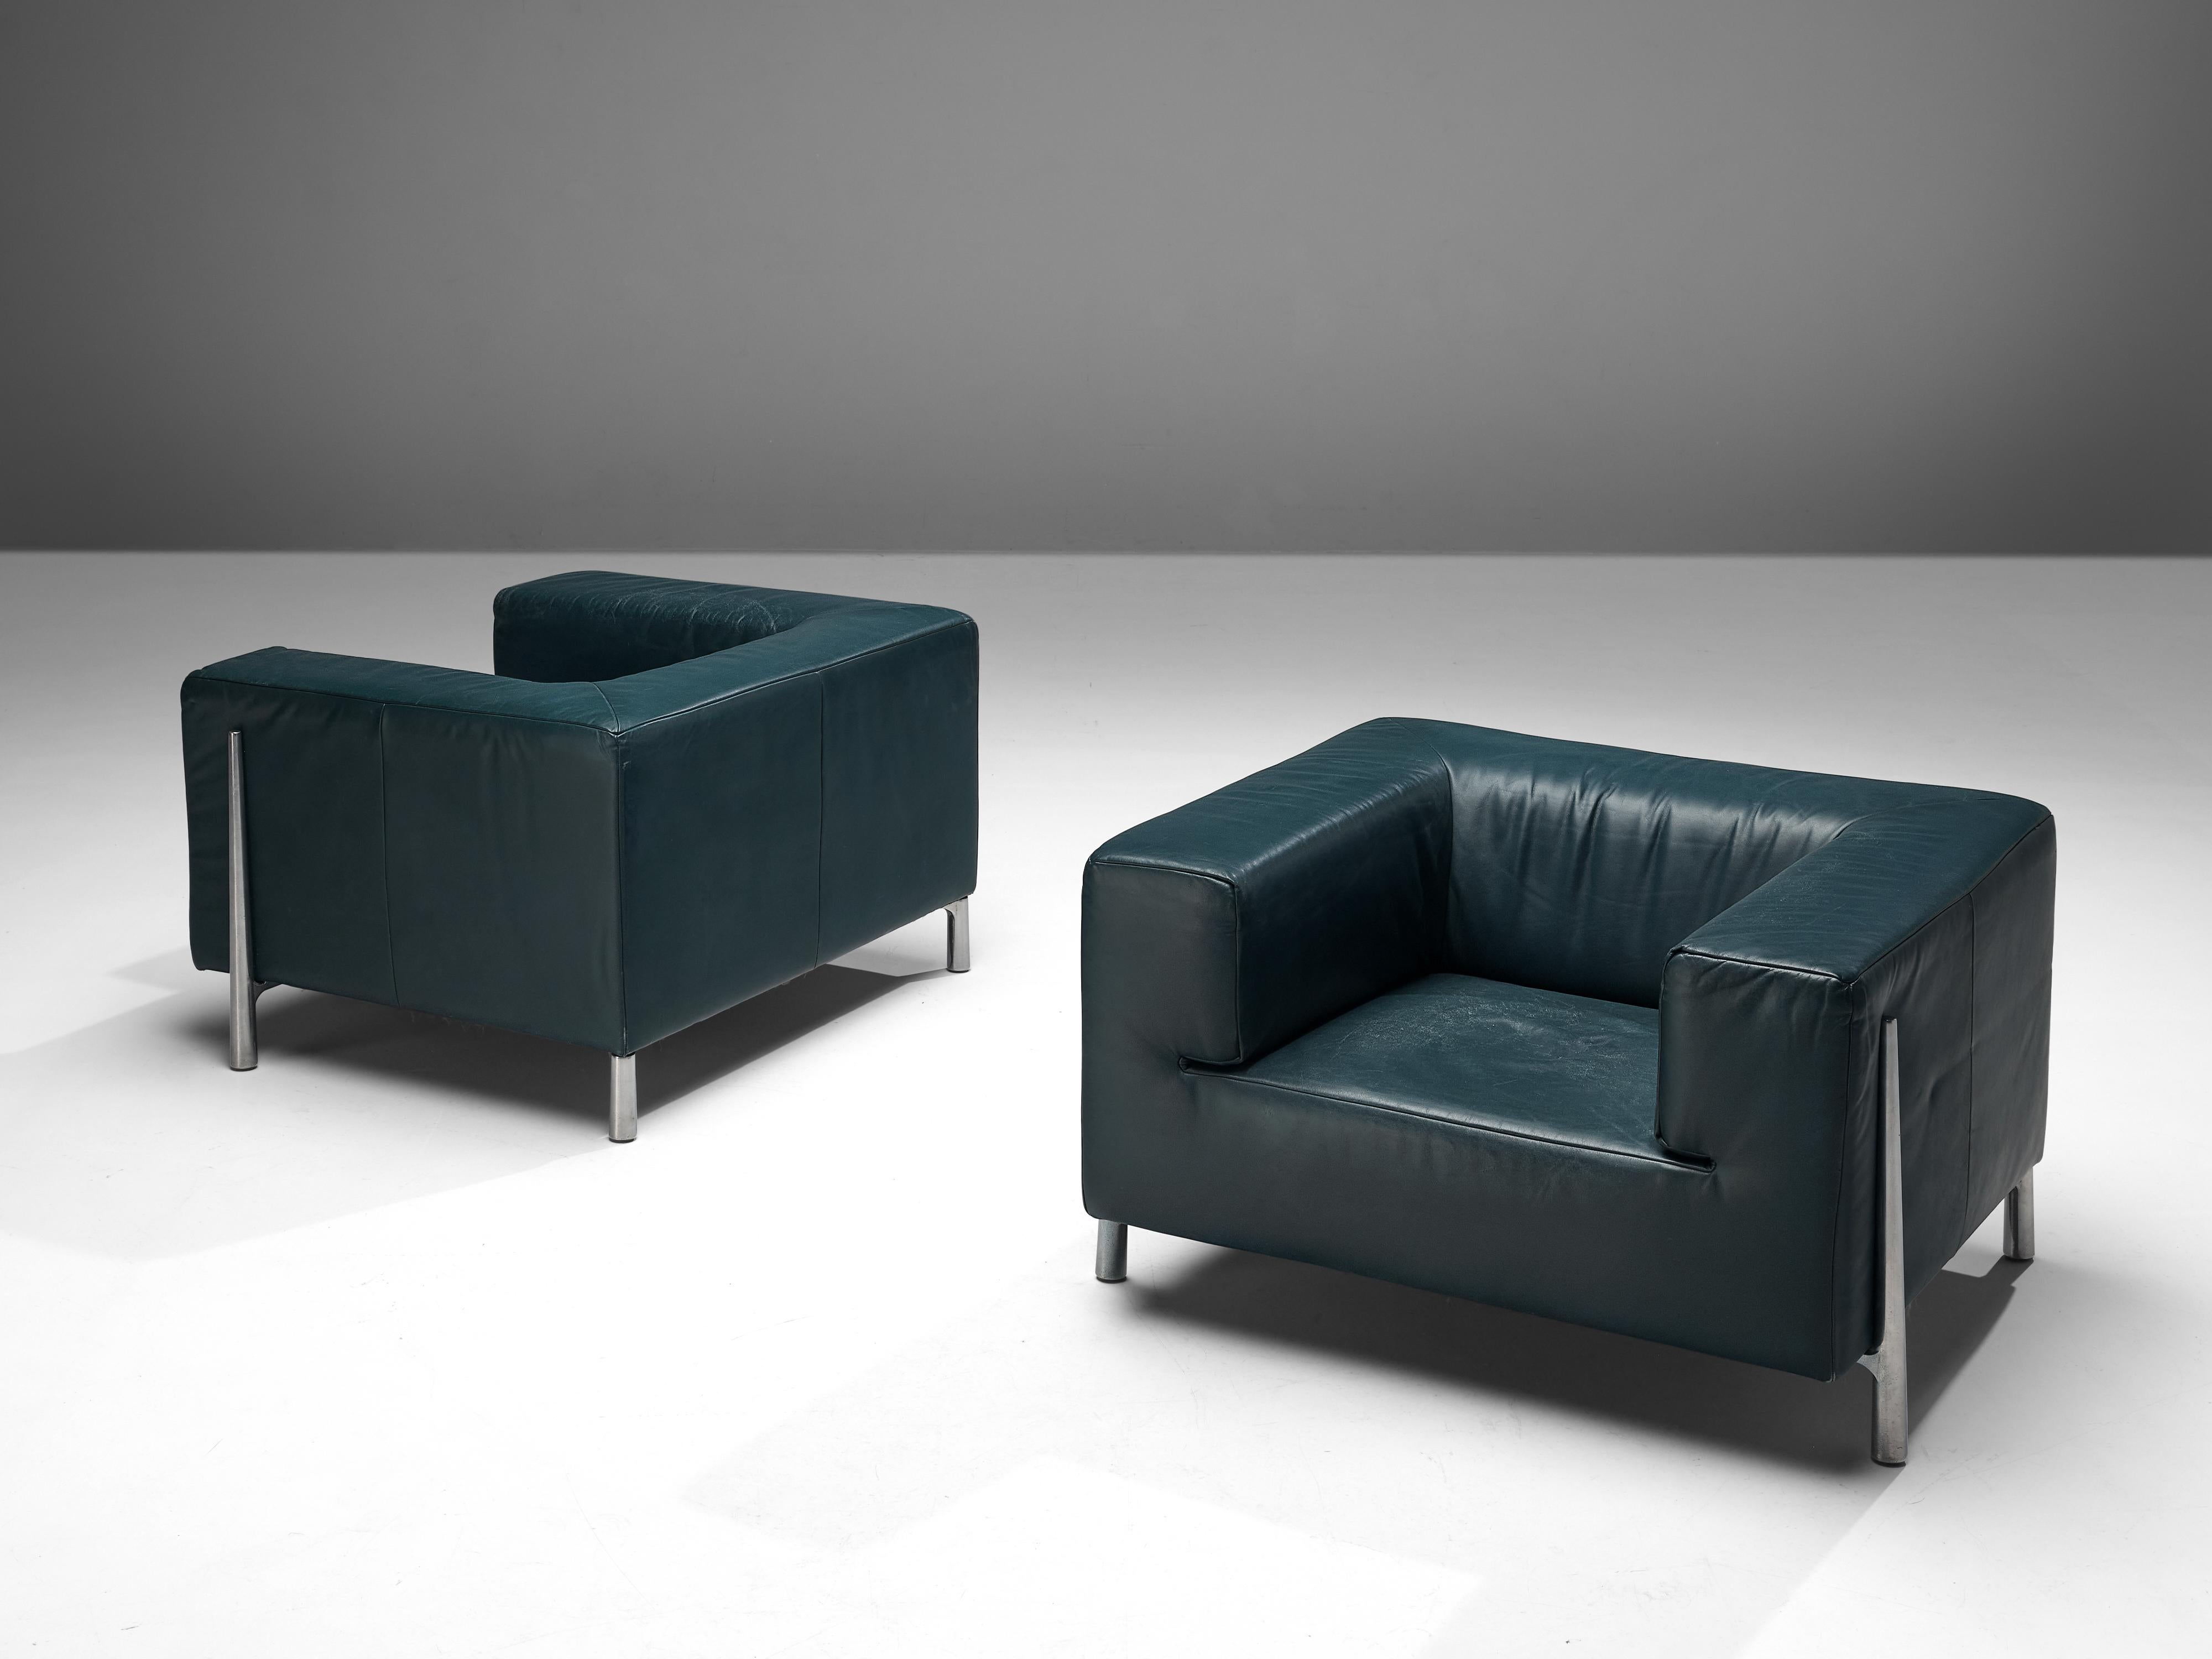 Lounge chairs, steel, leather, Europe, 1970s

These cubic armchairs show elegant steel details. The combination of steel and leather gives these lounge chairs a modern and sophisticated look. This is being emphasized by the nice color of the